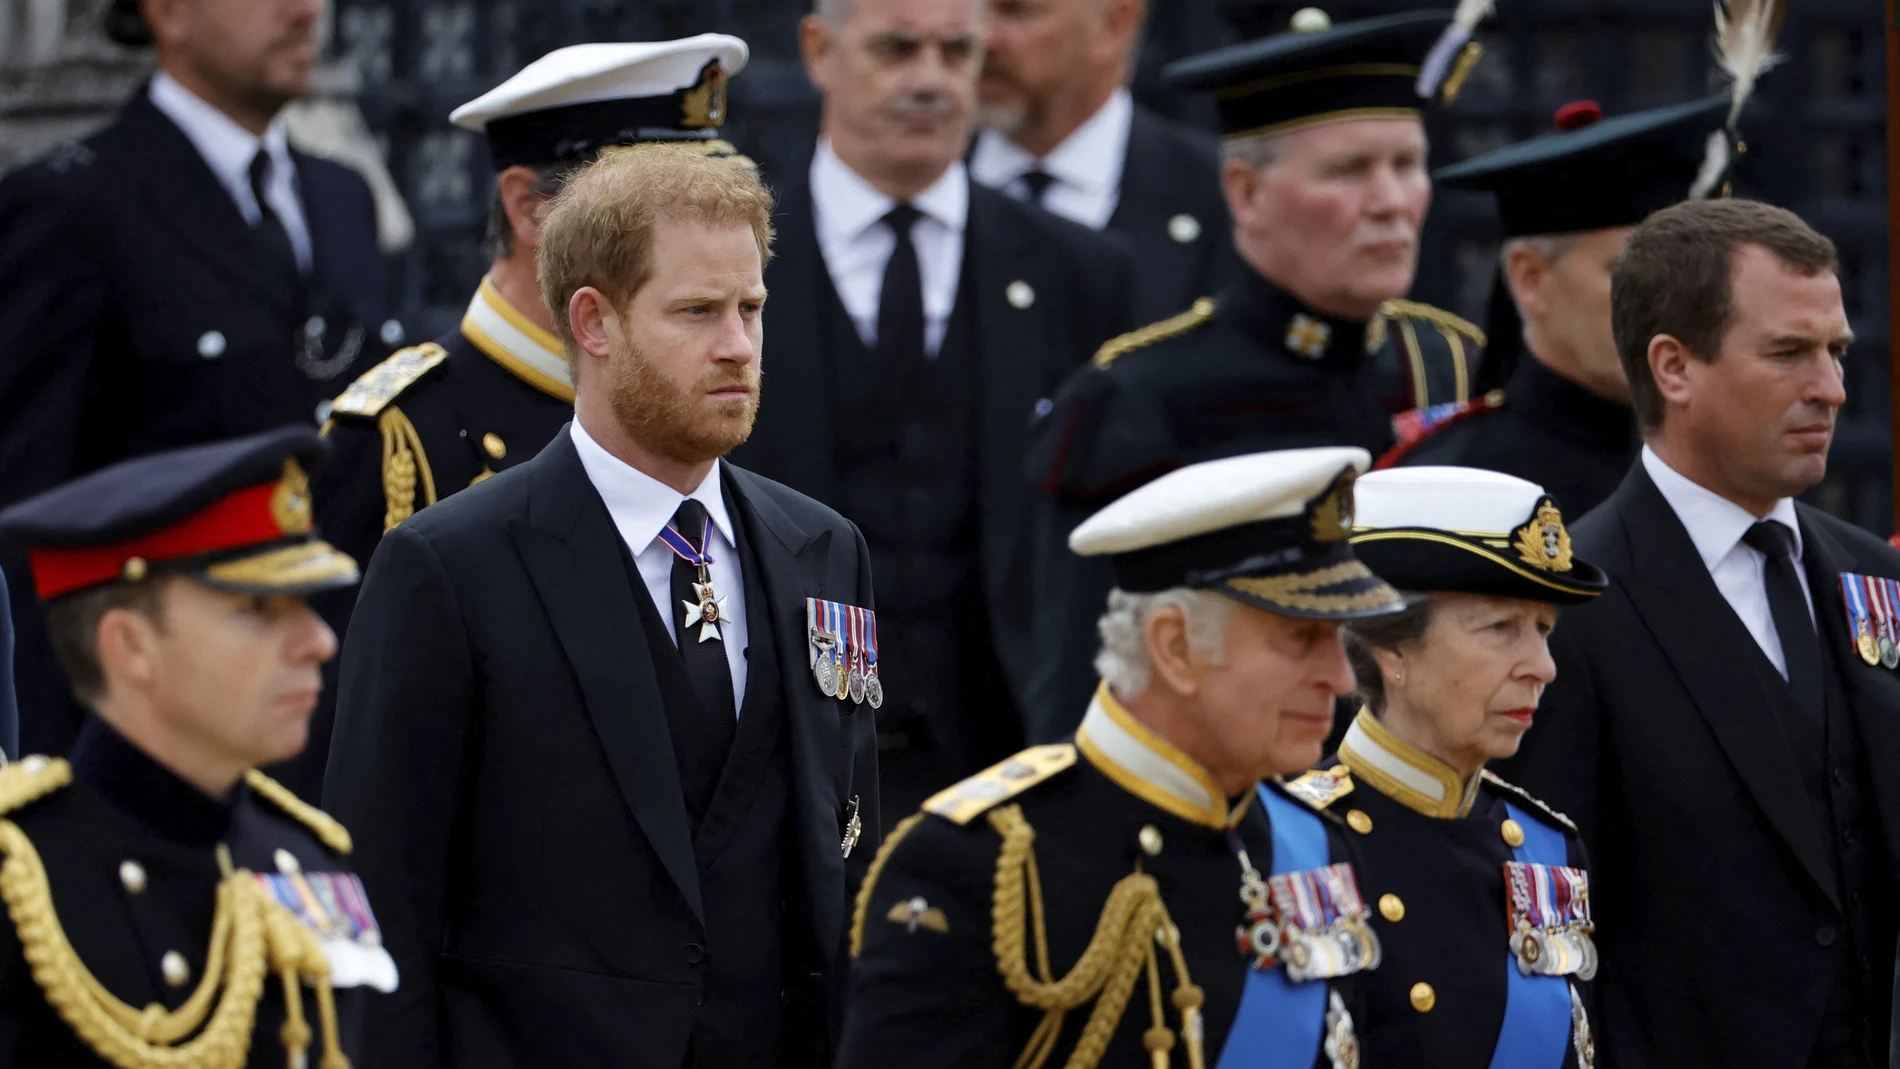 From second left, Prince Harry, King Charles III, Princess Anne and Peter Phillips arrive at Westminster Abbey for the funeral of Queen Elizabeth II, in London, Sept. 19, 2022. (Sarah Meyssonnier/Pool Photo via AP)